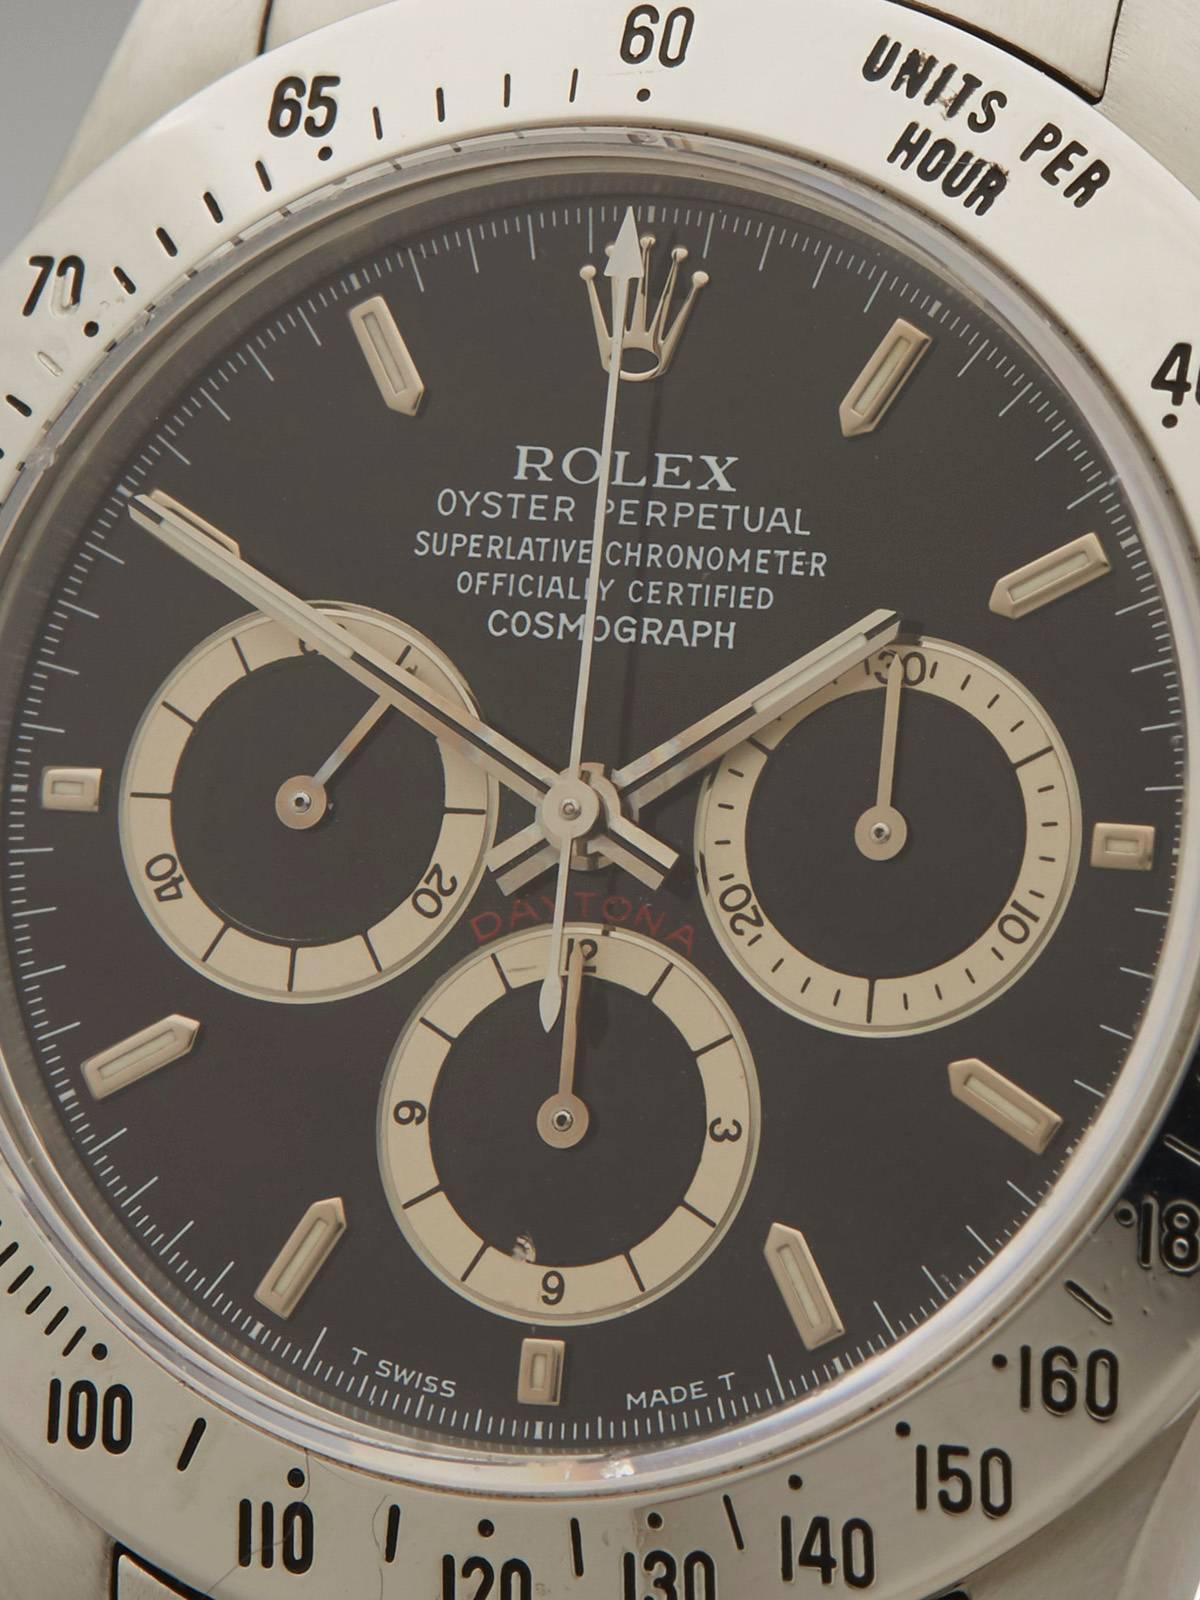 
REF	W2714
MODEL NUMBER	16520
SERIAL NUMBER	N47****
CONDITION	8 - Good condition
GENDER	Gents
AGE	1991
CASE DIAMETER	40 mm
CASE SIZE	40mm
BOX & PAPERS	Box and Rolex Service Papers dated 18th December 2014
MOVEMENT	Automatic
CASE	Stainless